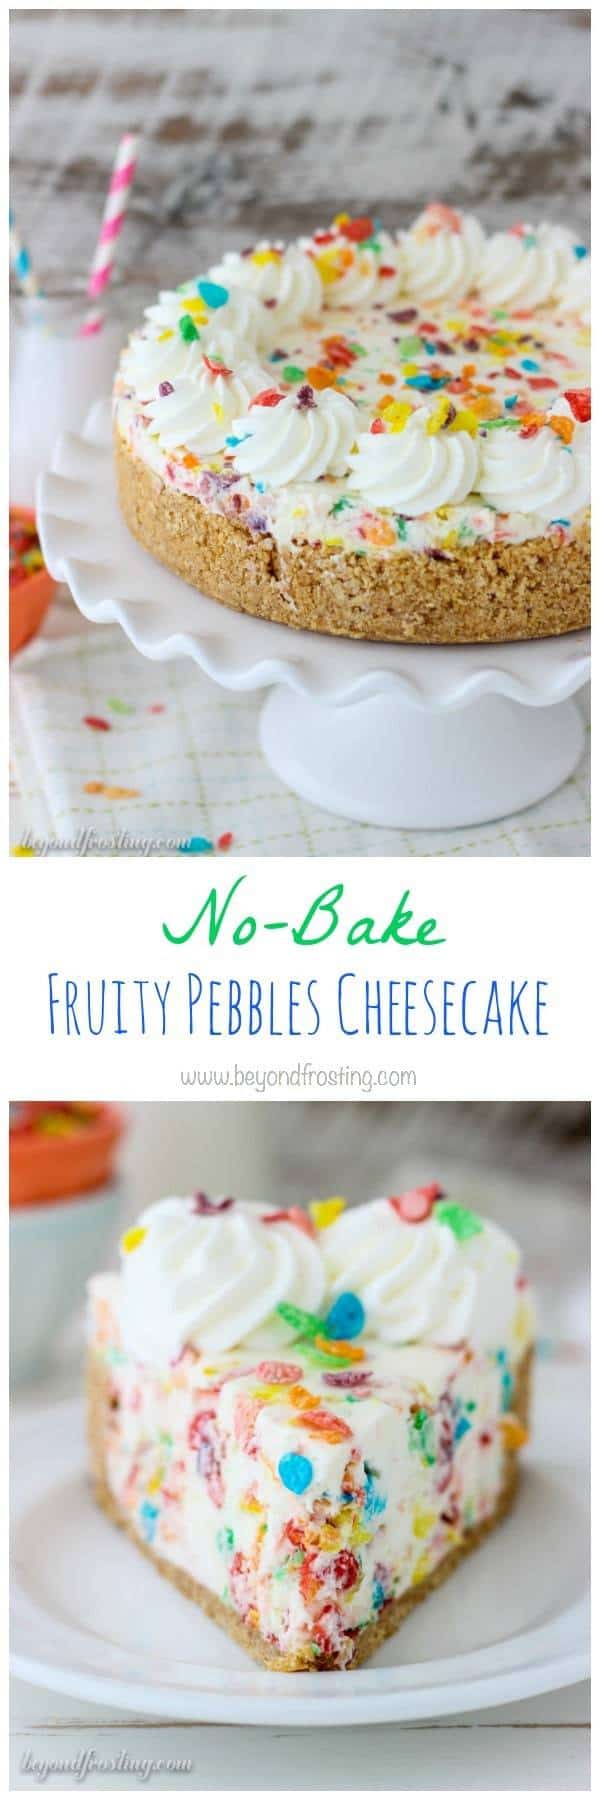 You’ll love the fruity flavors in this No-Bake Fruity Pebbles Cheesecake! The no-bake cheesecake filling is loaded with Fruity Pebbles on a Nilla Wafer crust. This recipe is quick, easy and delicious!